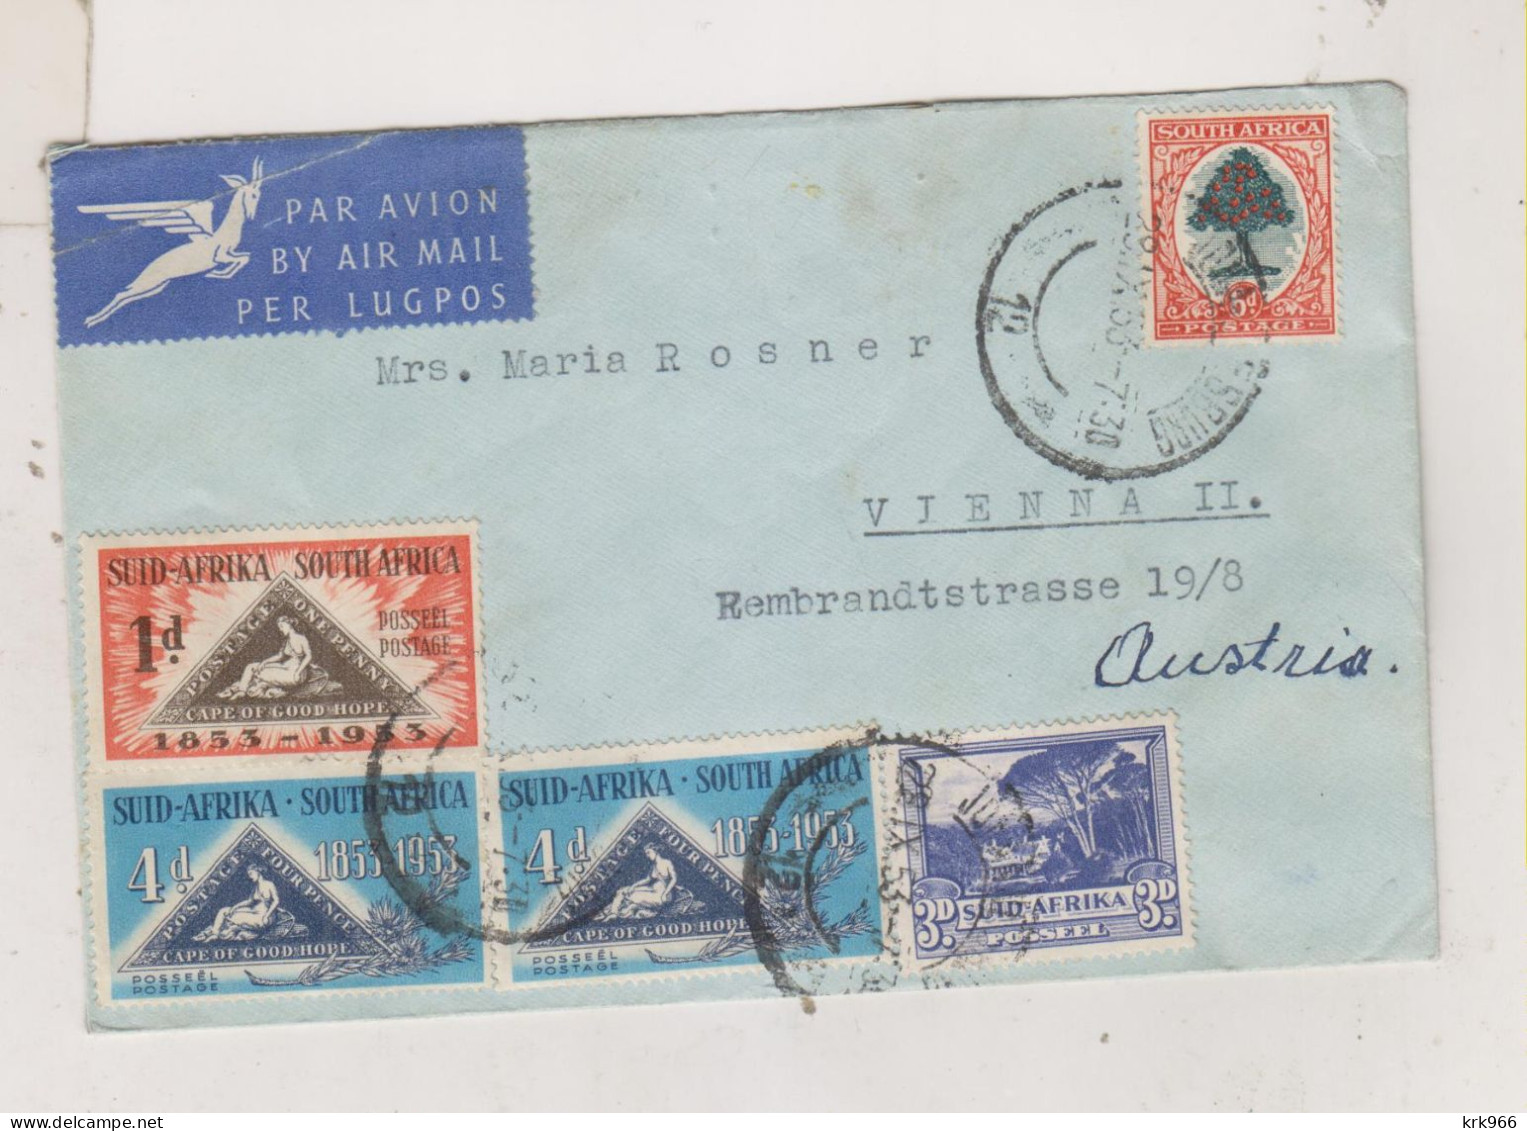 SOUTH AFRICA 1953 JOHANNESBURG  Nice   Airmail Cover To Austria - Luftpost